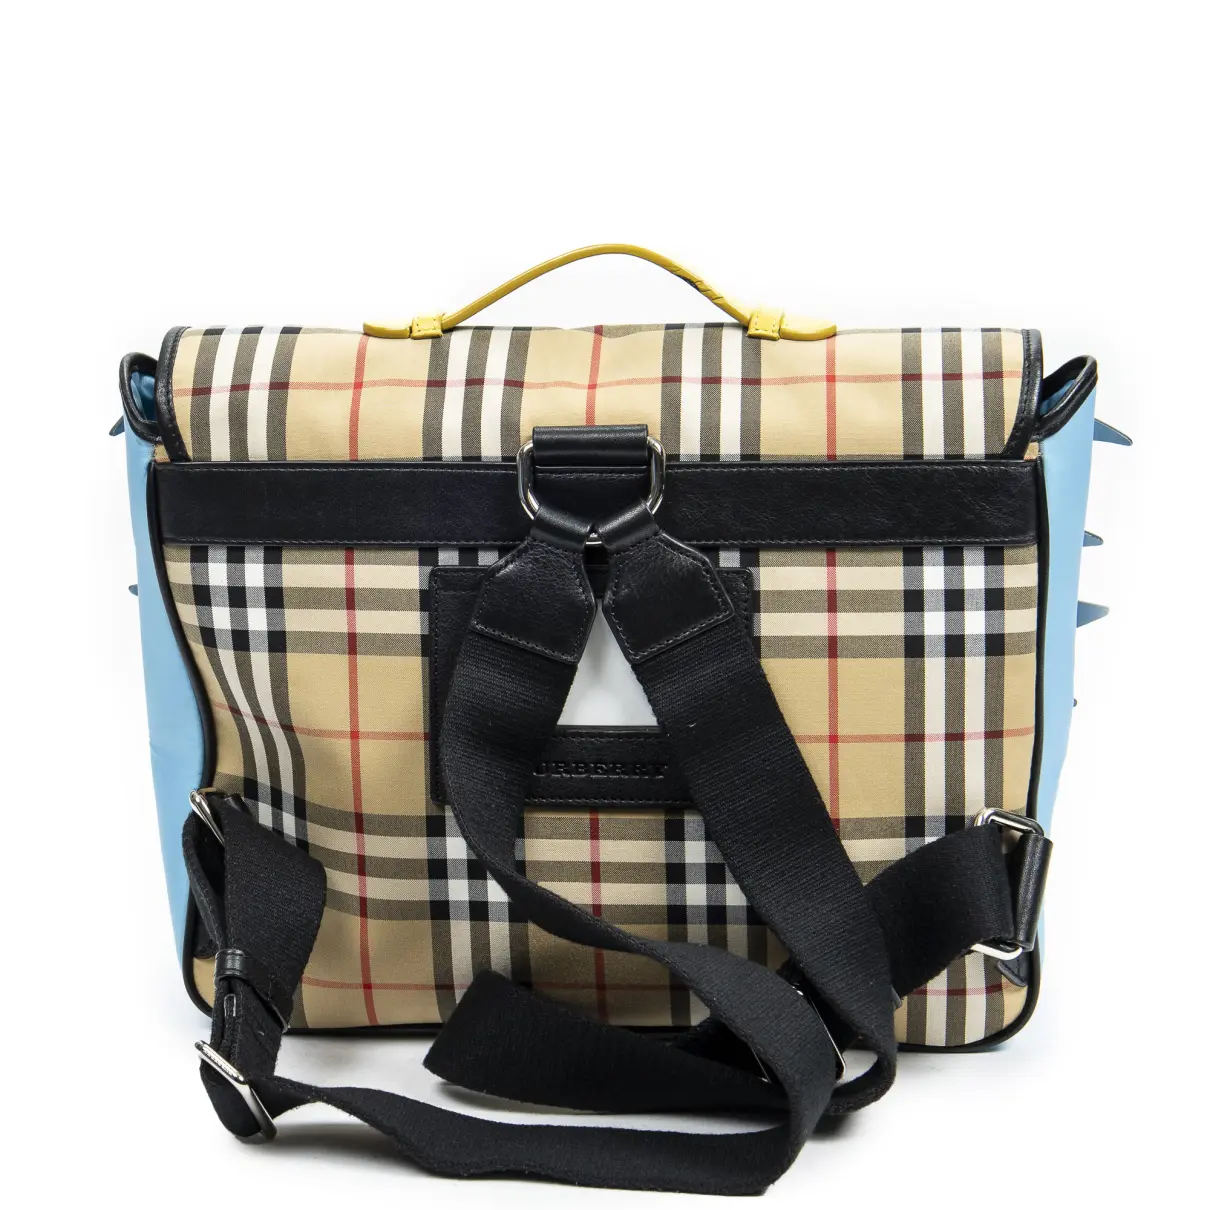 Backpack Burberry